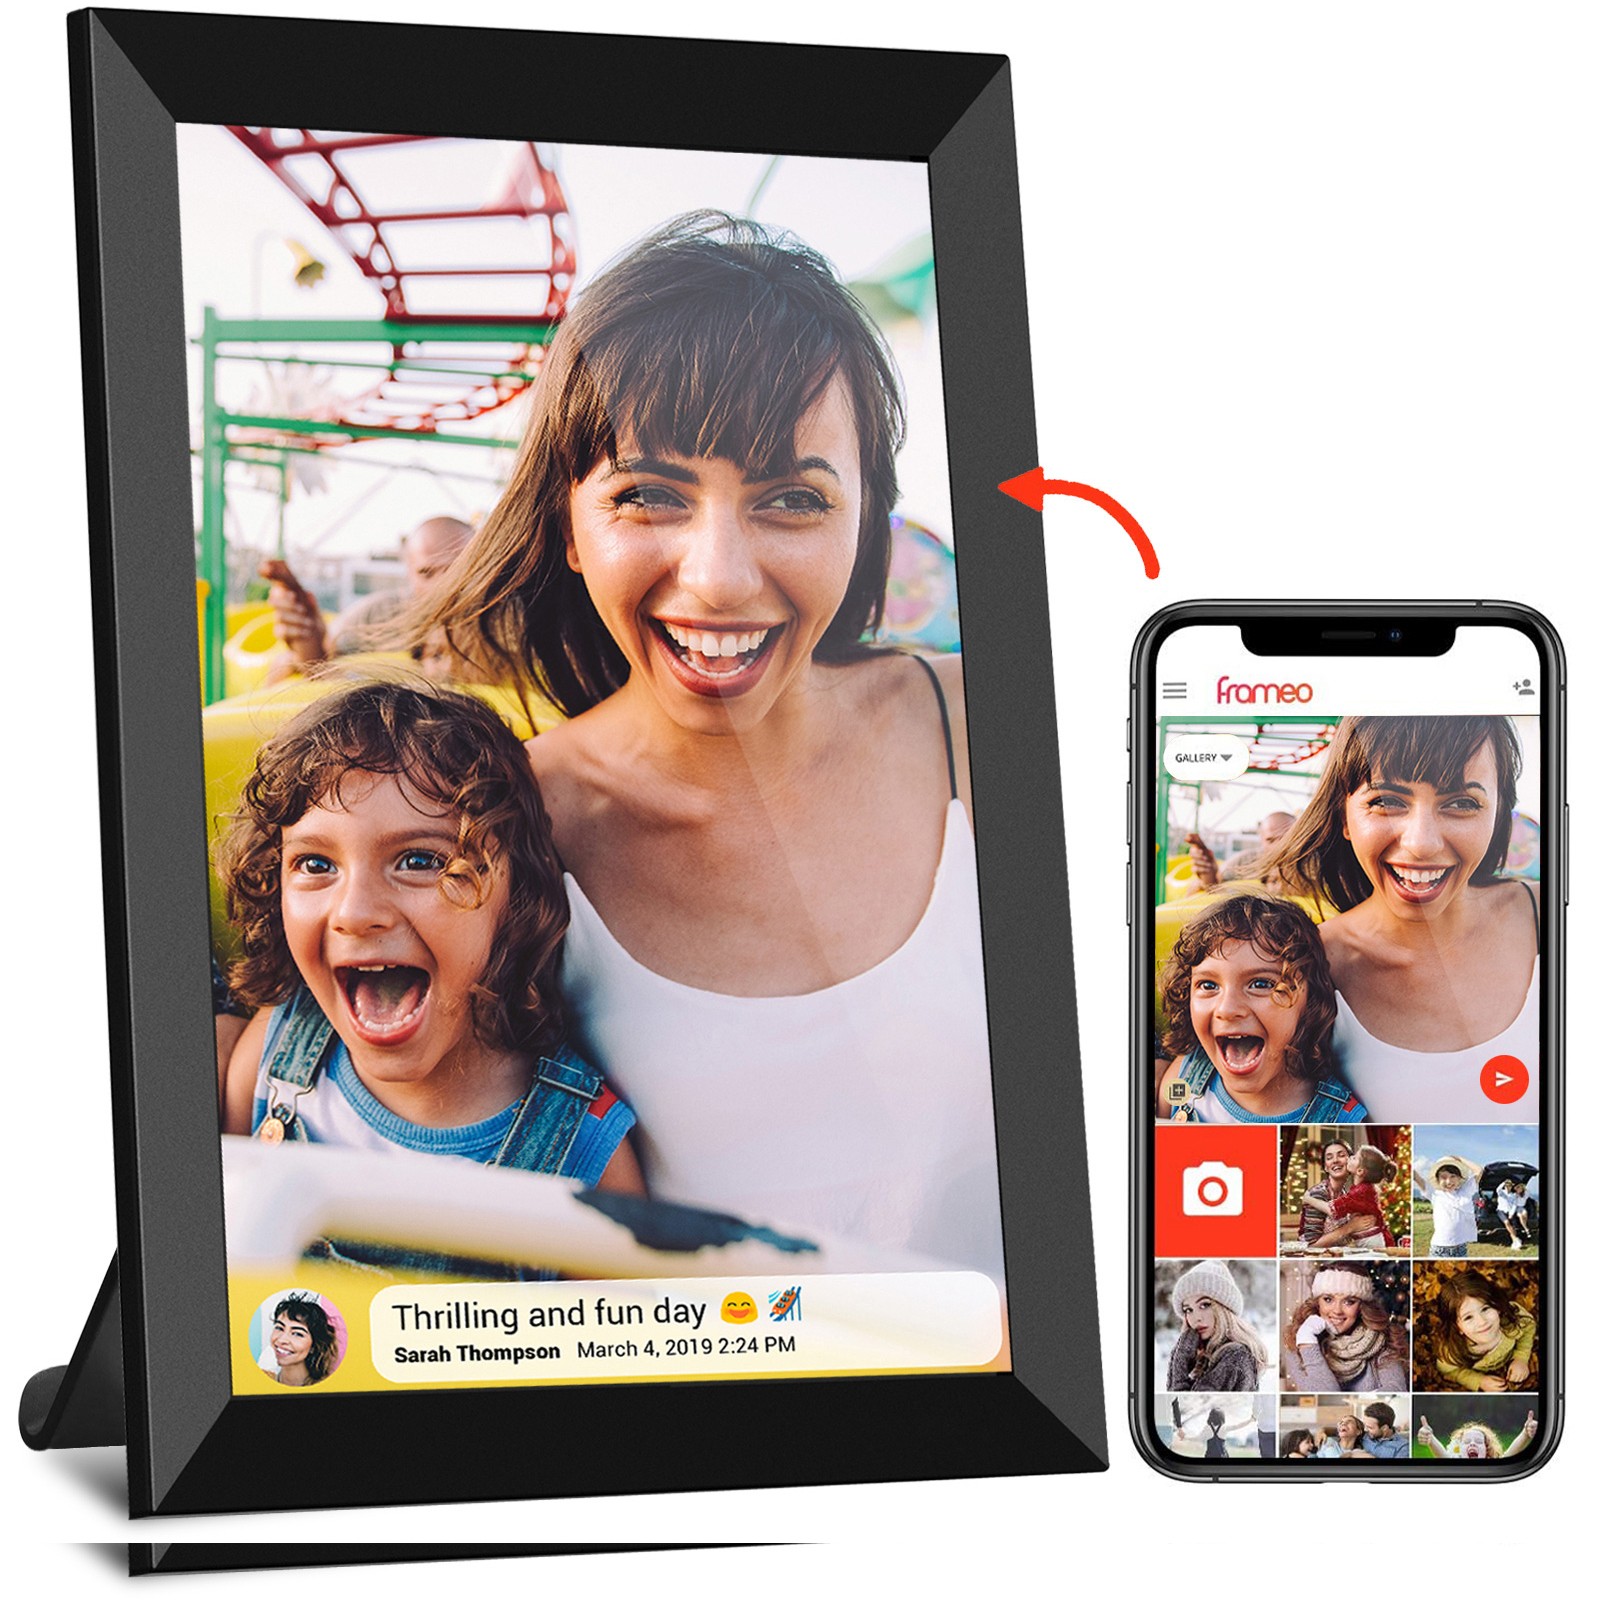 Frameo APP 10.1 Inch Frame With Touch Screen share Photos Videos from 15 years OEM factory Wifi Digital Photo picture frames